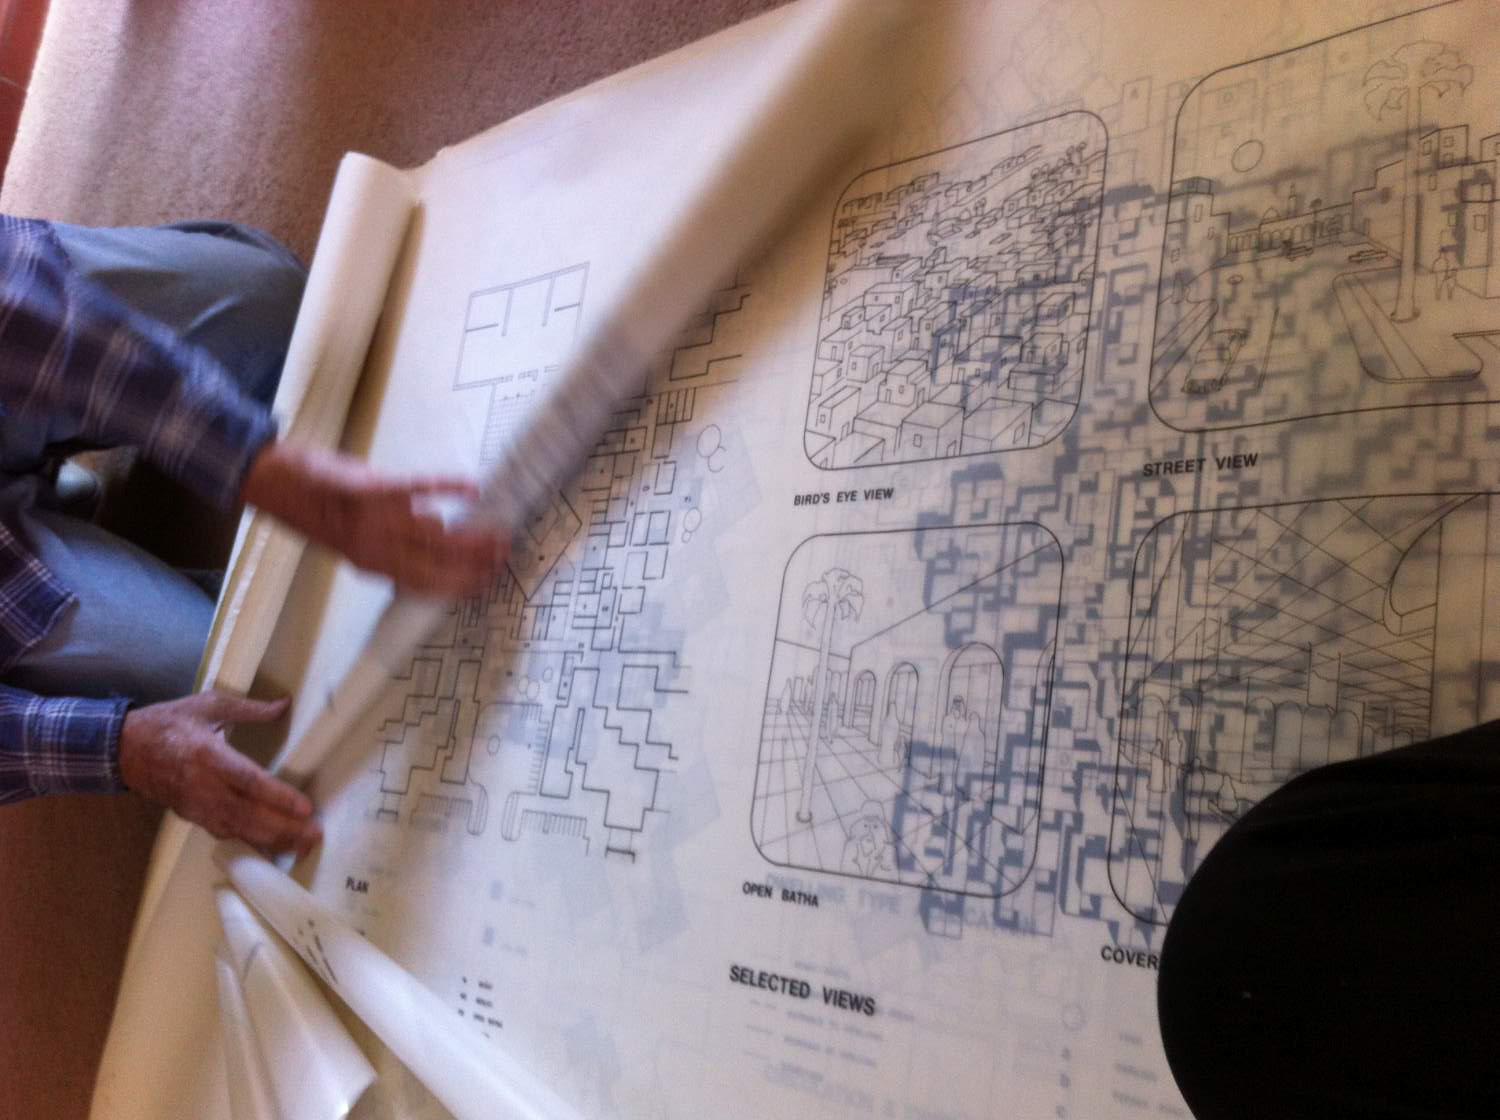 Besim Hakim unrolling several illustrations and urban planning maps from his work in Tunis in the 1970s, in Albuquerque, New Mexico, October 2017.